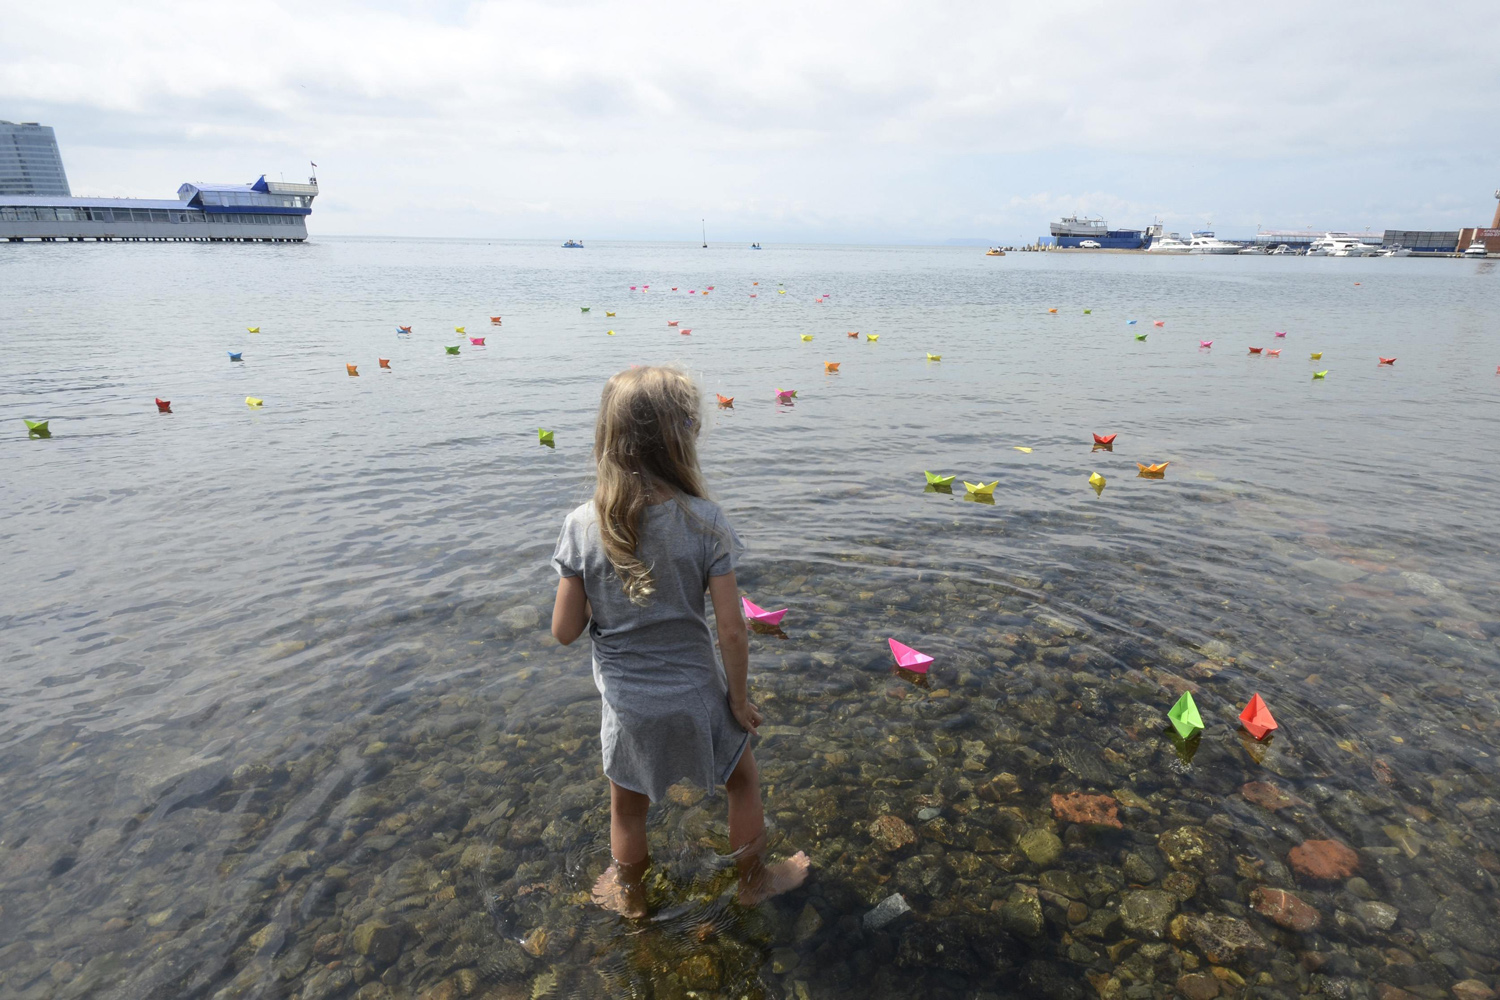 A girl looks at paper boats launched during celebrations for the 69th anniversary of the end of World War Two in the far eastern city of Vladivostok, Russia on Sept. 2, 2014.